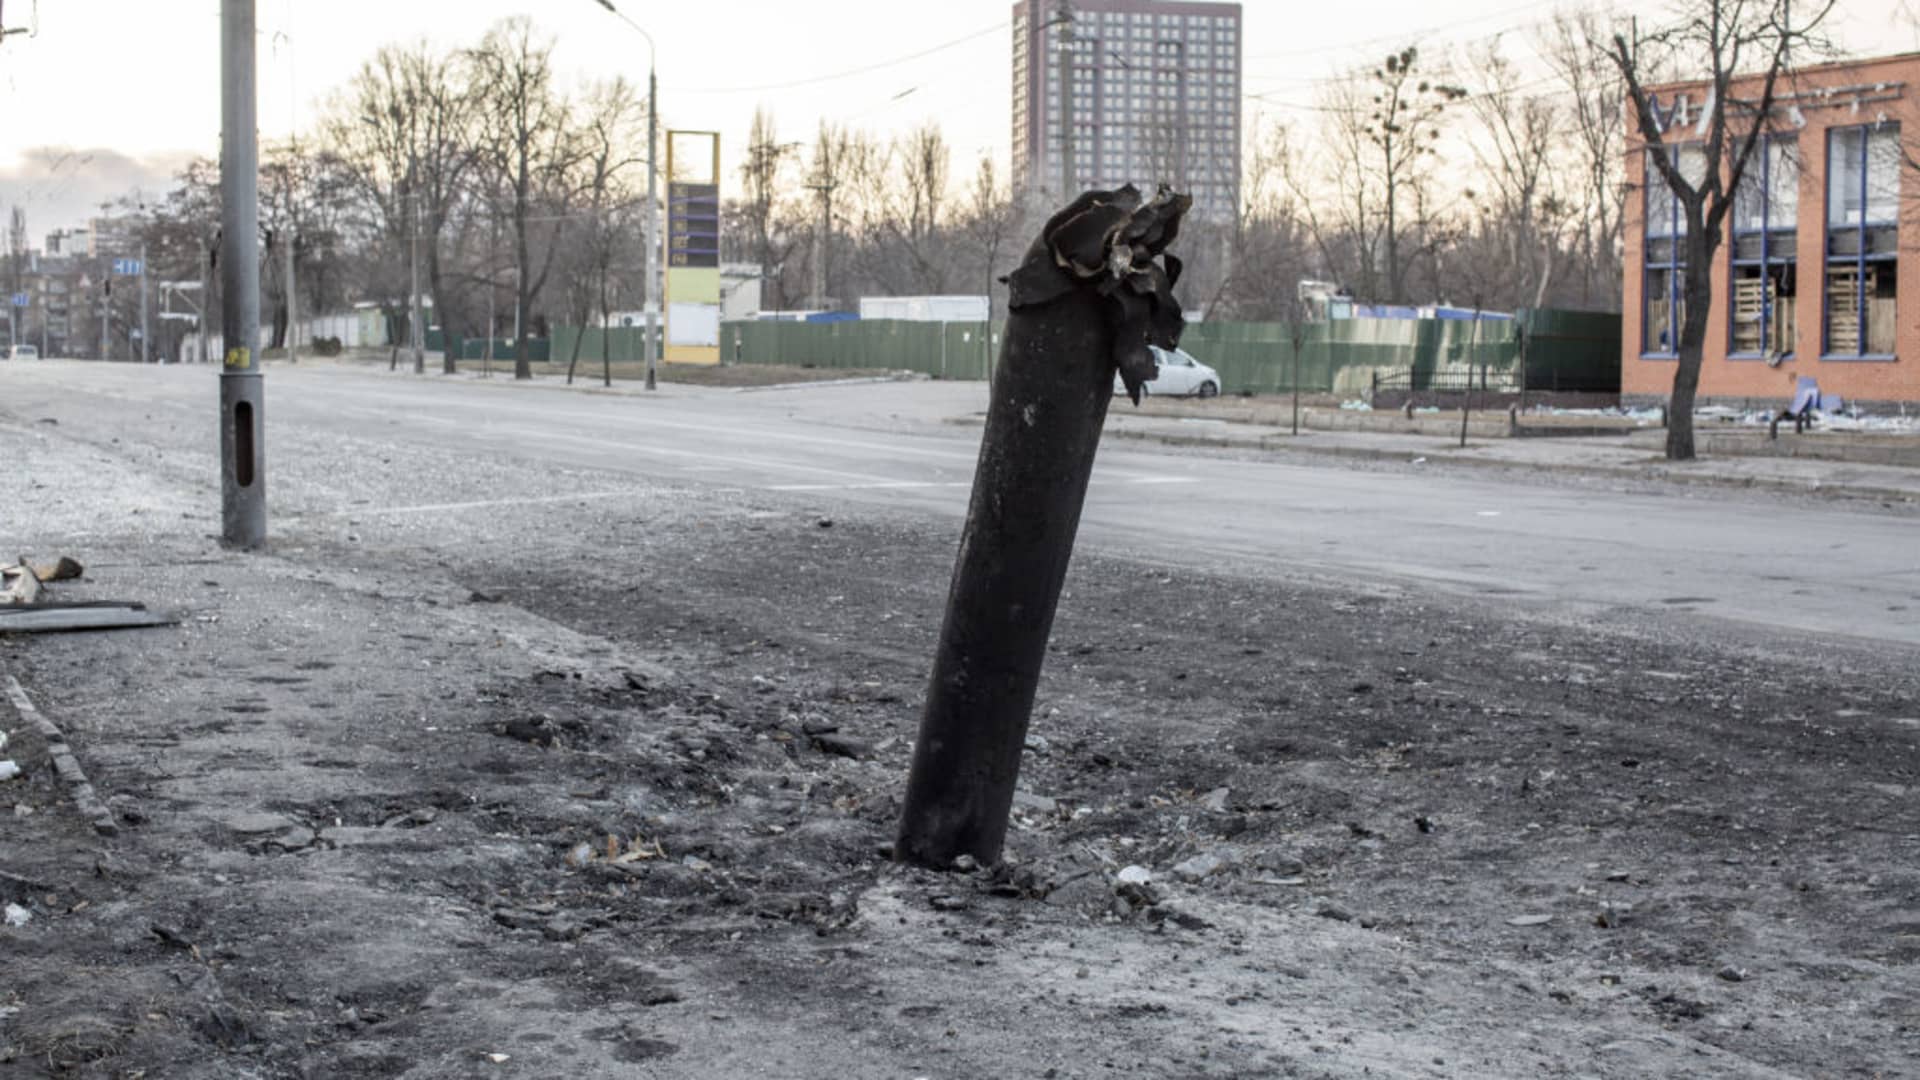 The debris of an exploded device remains on the street in Dorohozhychi, Shevchenko district in Kyiv, Ukraine, March 18th, 2022.